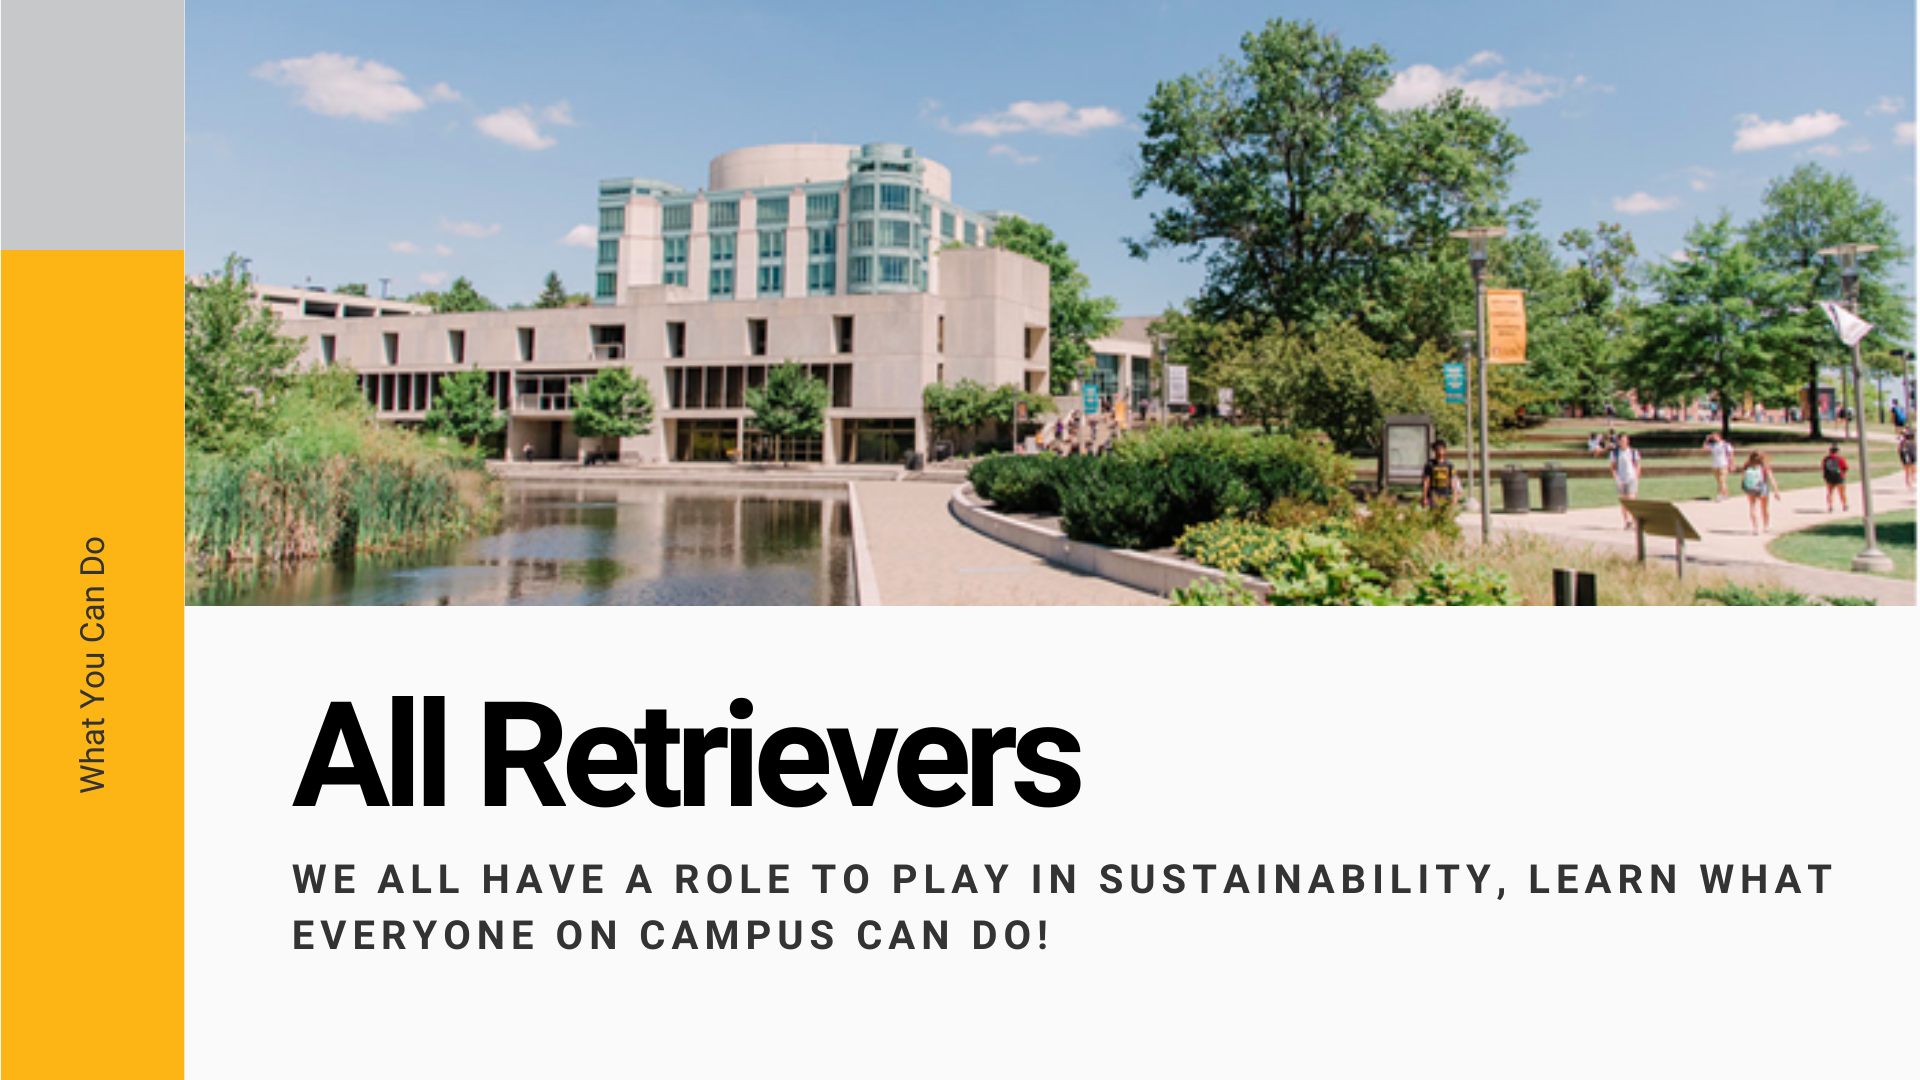 All Retrievers Header : We all have a role to play in sustainability, learn what everyone on campus can do!